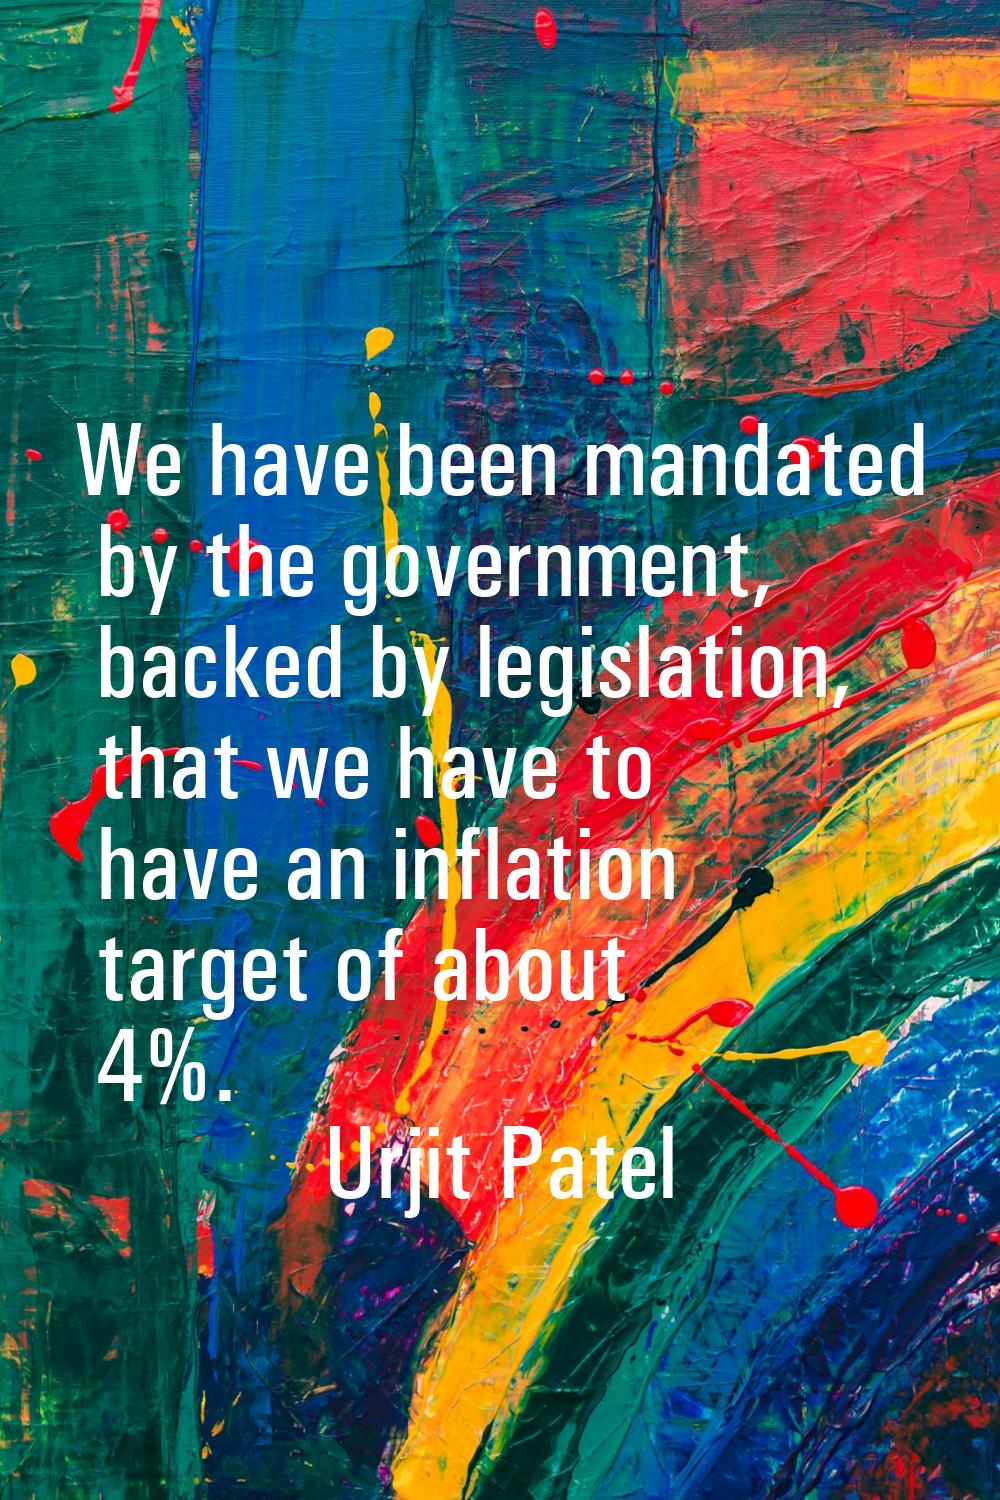 We have been mandated by the government, backed by legislation, that we have to have an inflation t